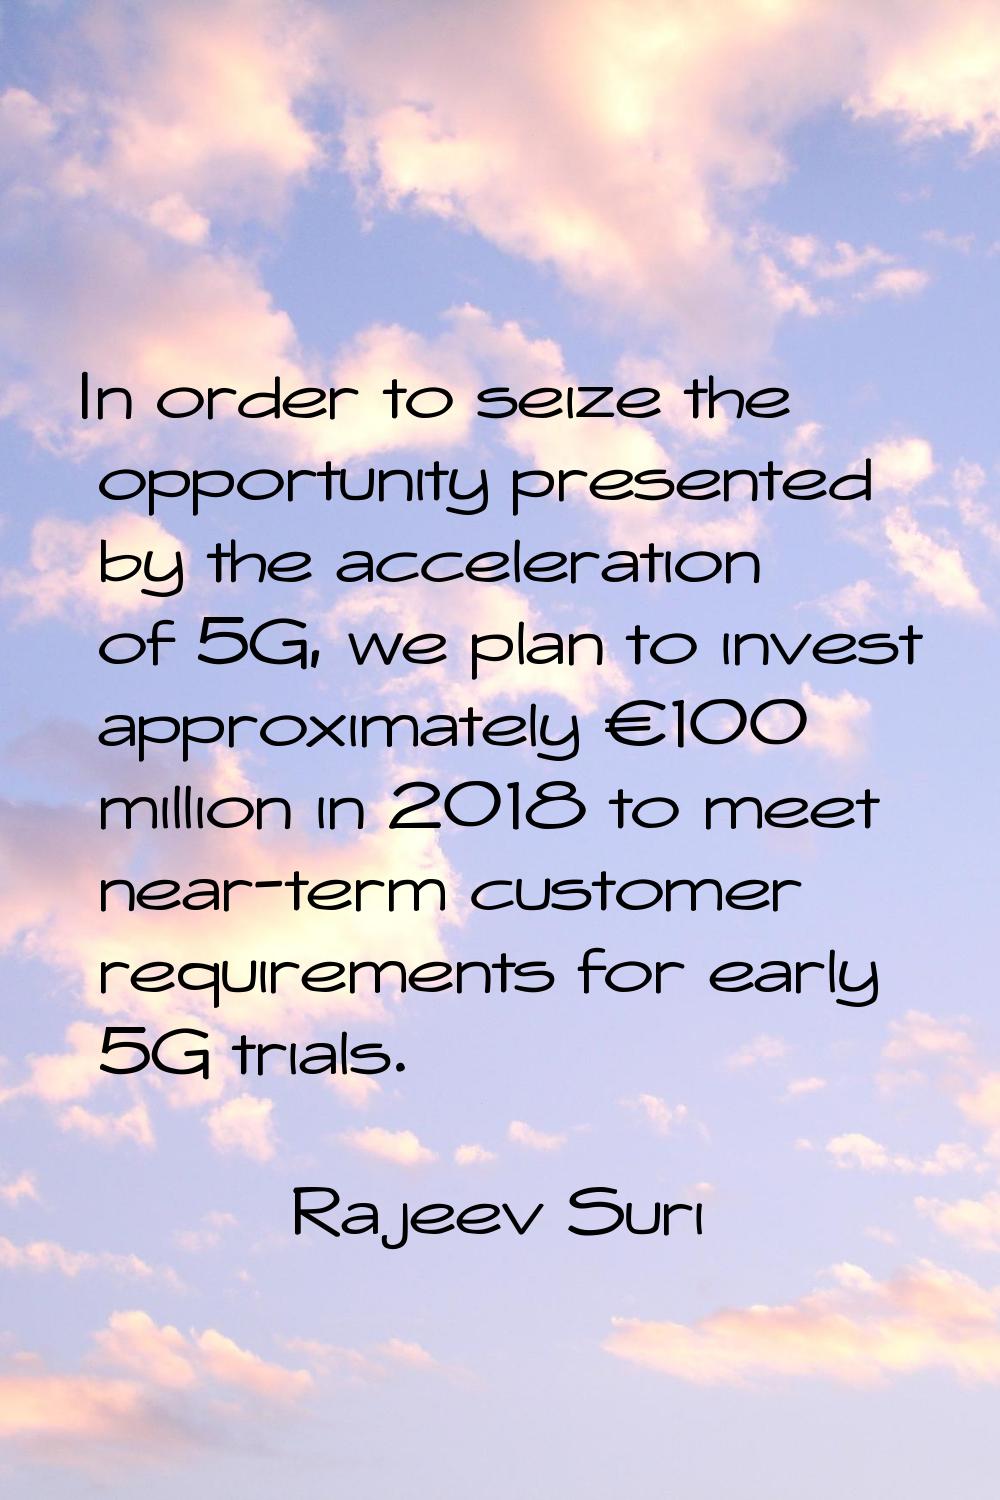 In order to seize the opportunity presented by the acceleration of 5G, we plan to invest approximat